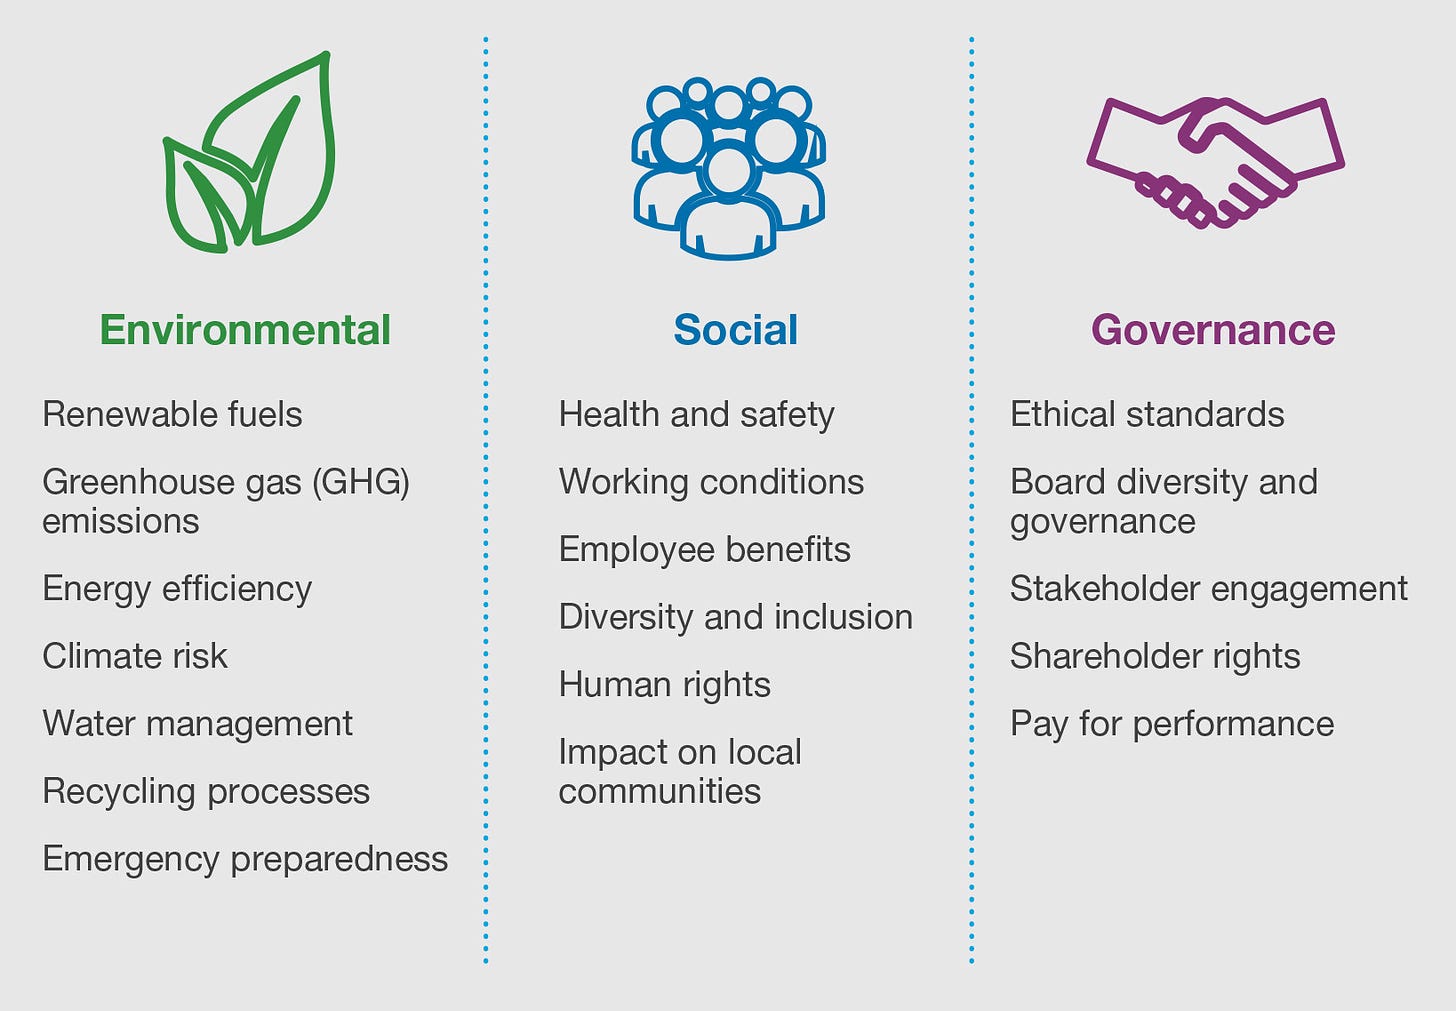 ESG measures businesses' environment, social and governance credentials – but is that enough?